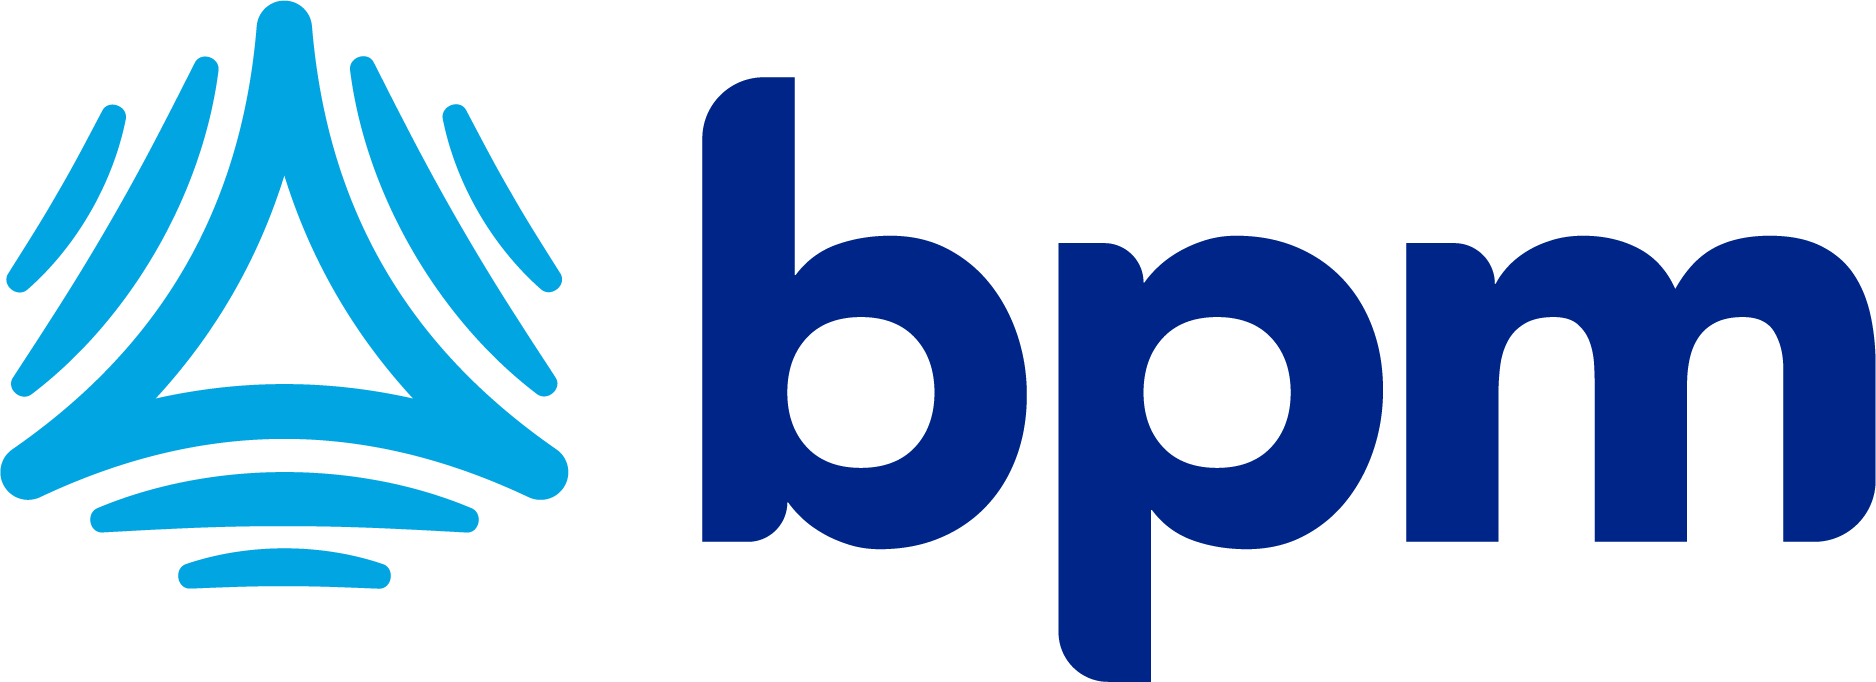 BPM Accounting and Consulting Firm logo